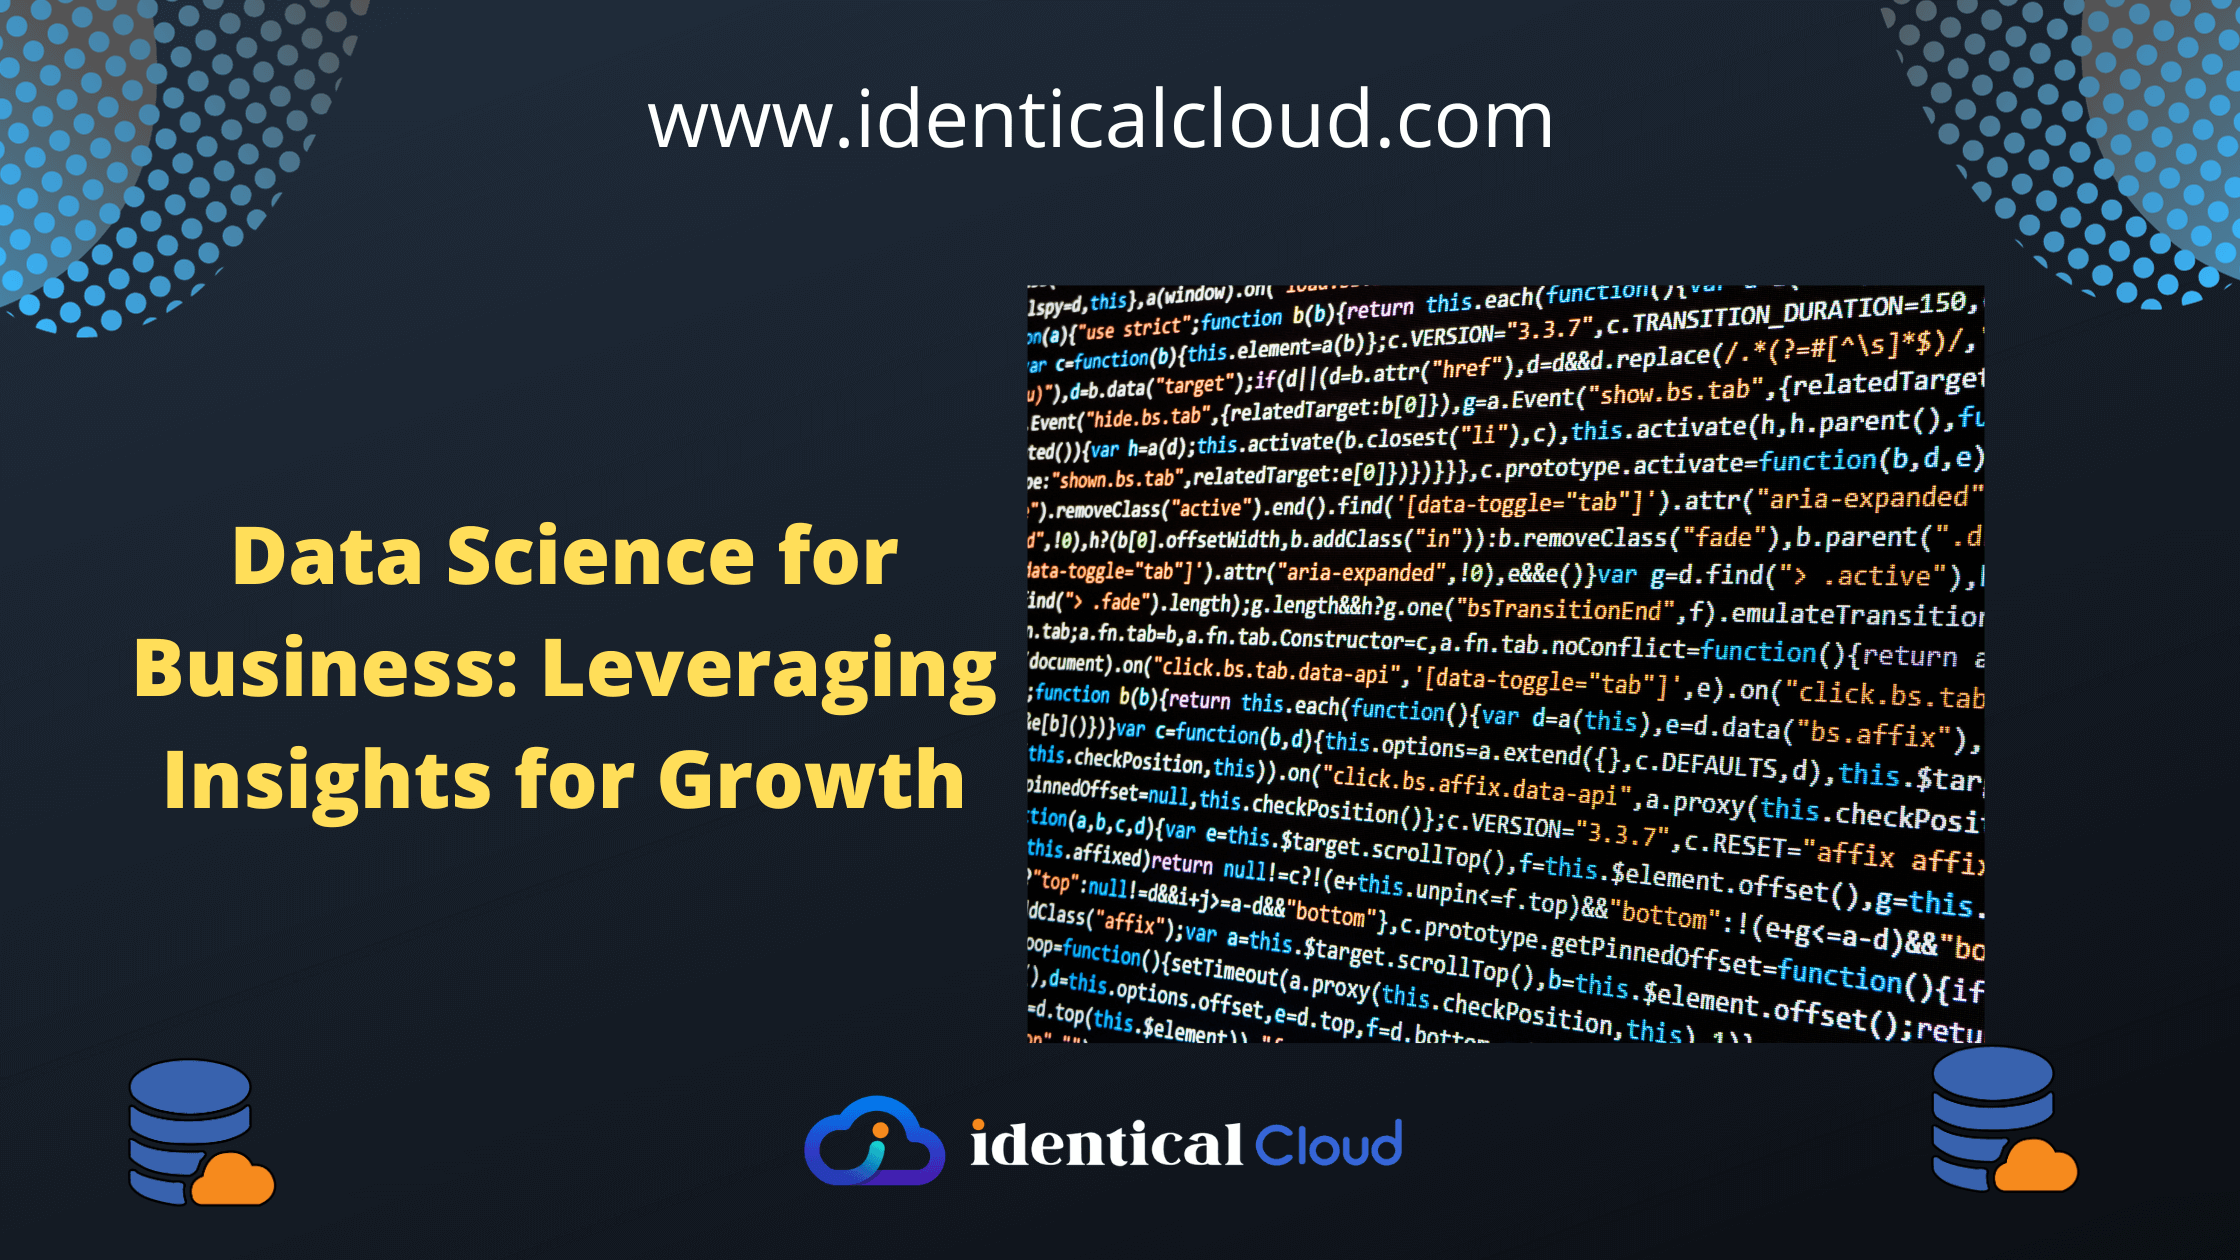 Data Science for Business - Leveraging Insights for Growth - identicalcloud.com